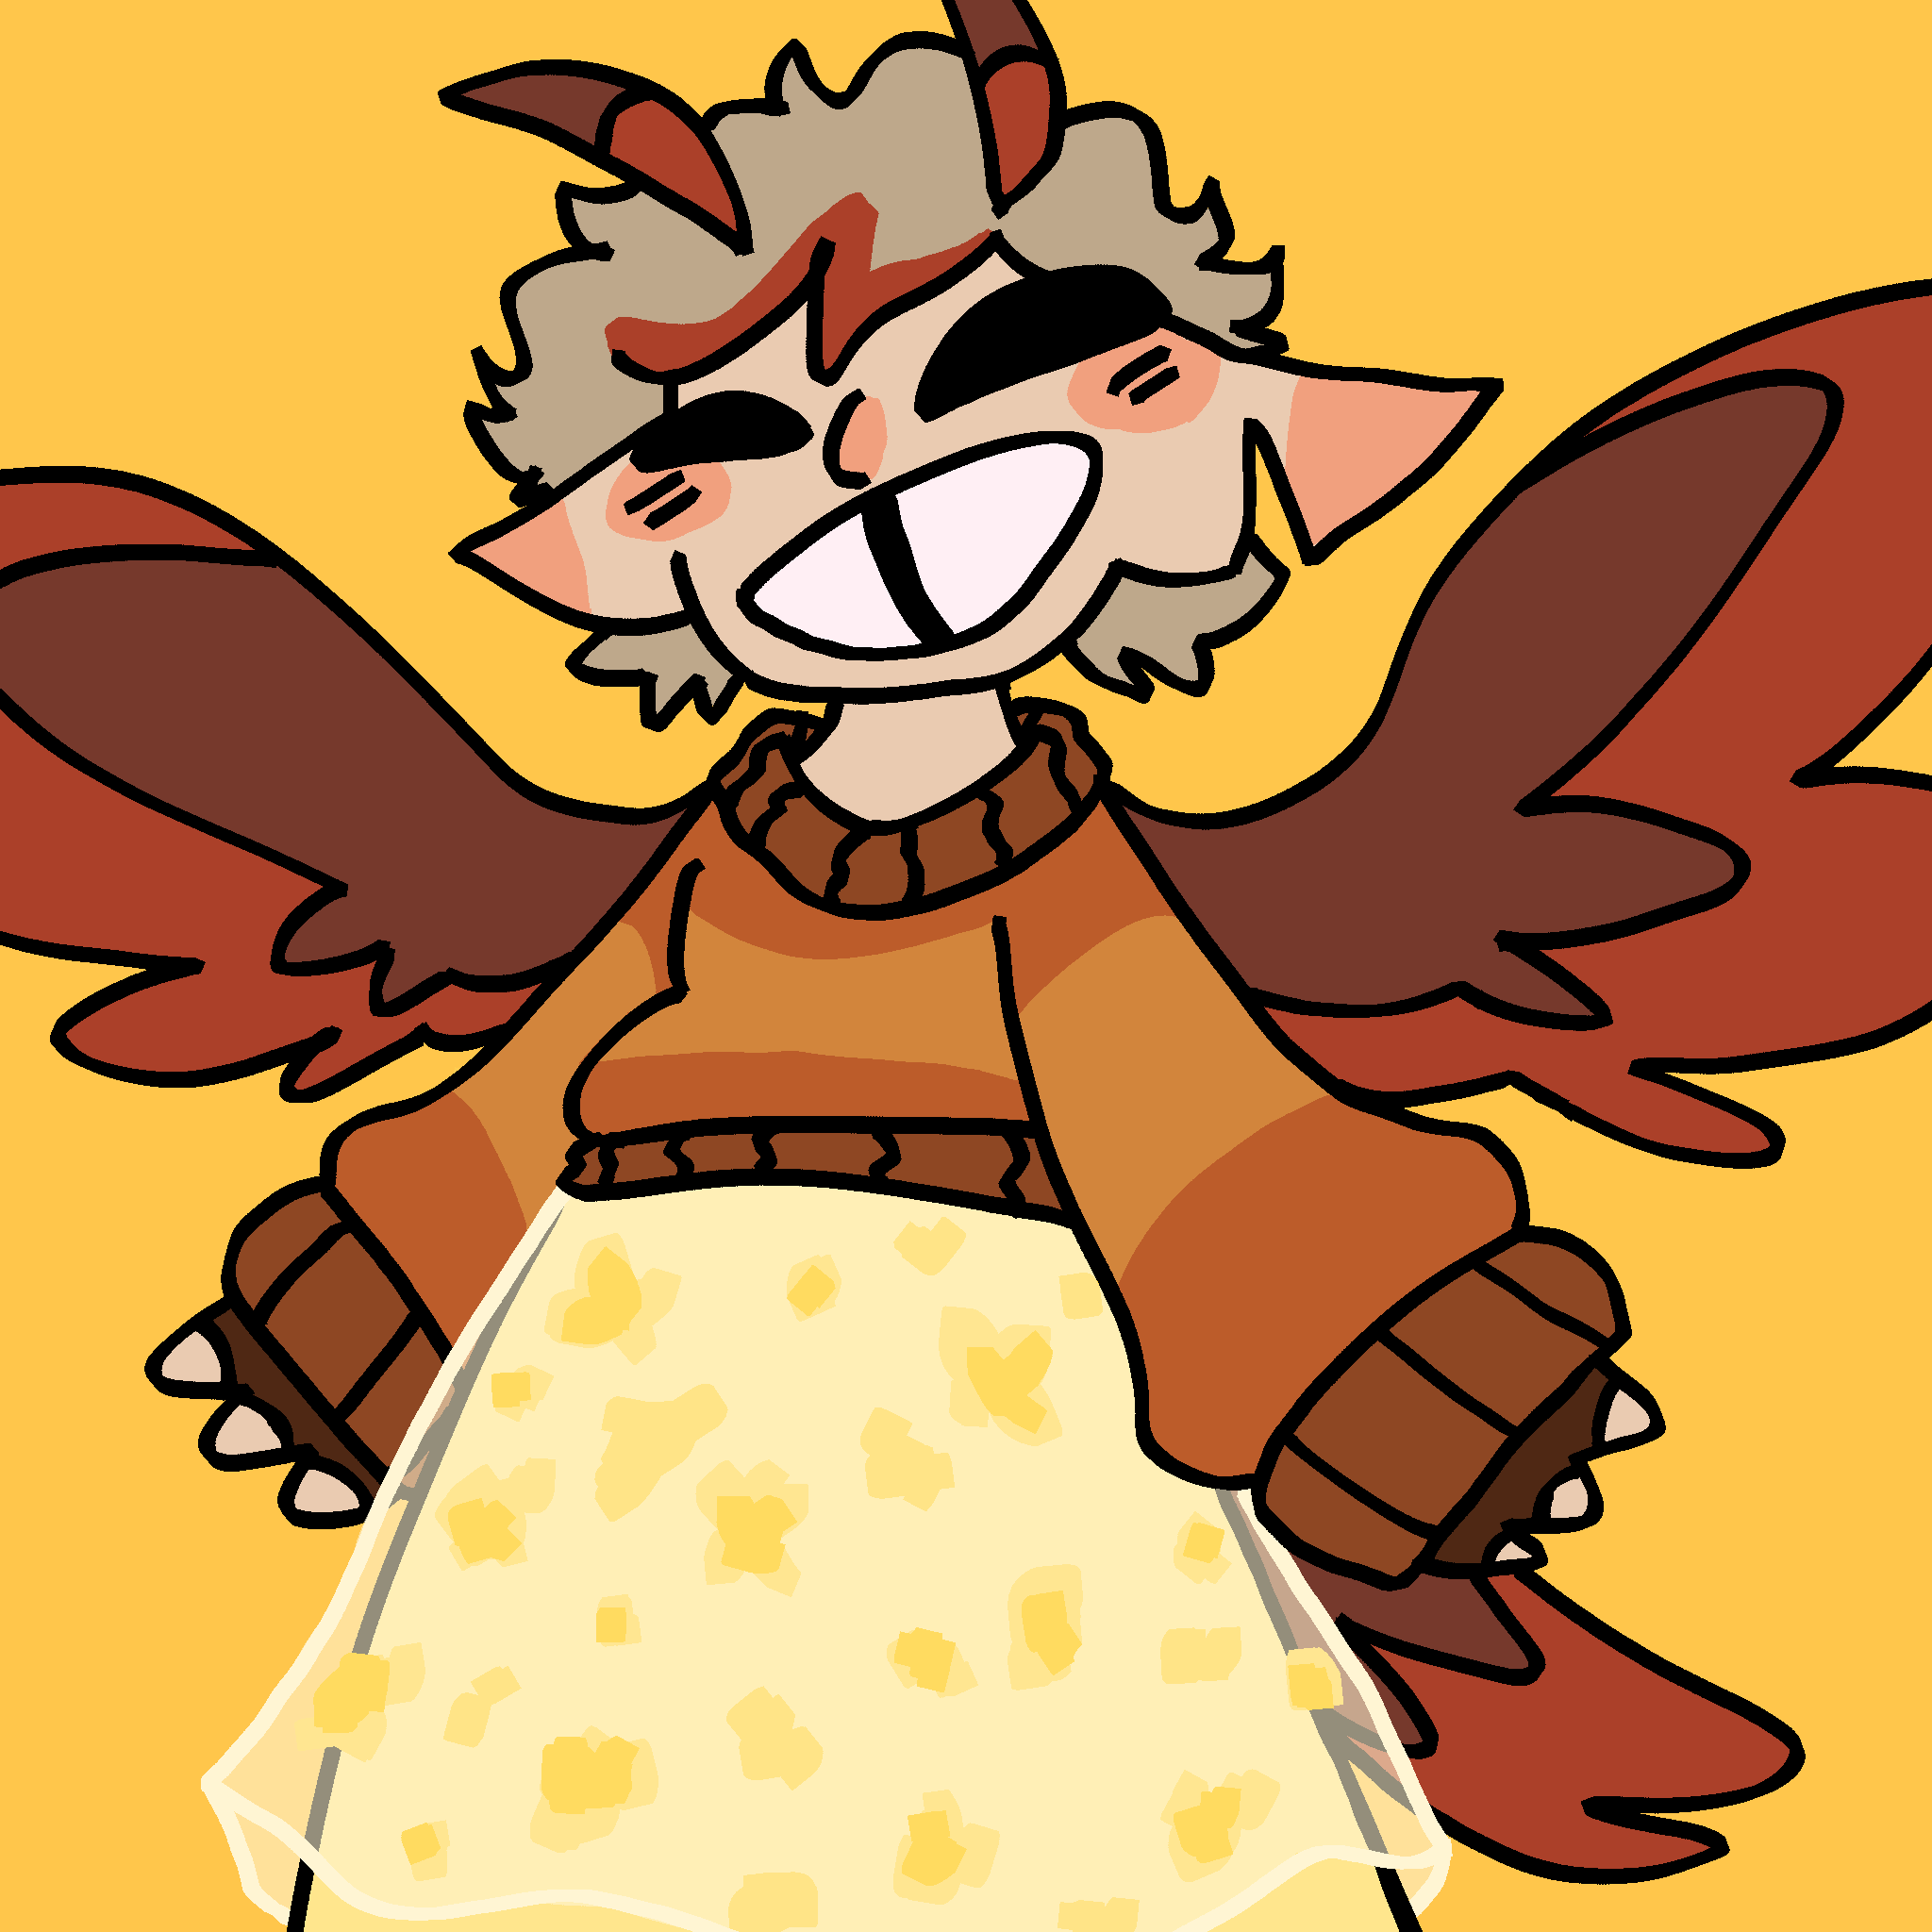 A drawing of a white person with short fluffy blond hair with a red streak, pointy ears (one of which is chipped), and a tooth gap. They have red wings, tail, and feather antennae. They are wearing a cozy autumn colored sweater and a light yellow long flowy skirt with flowers on it.